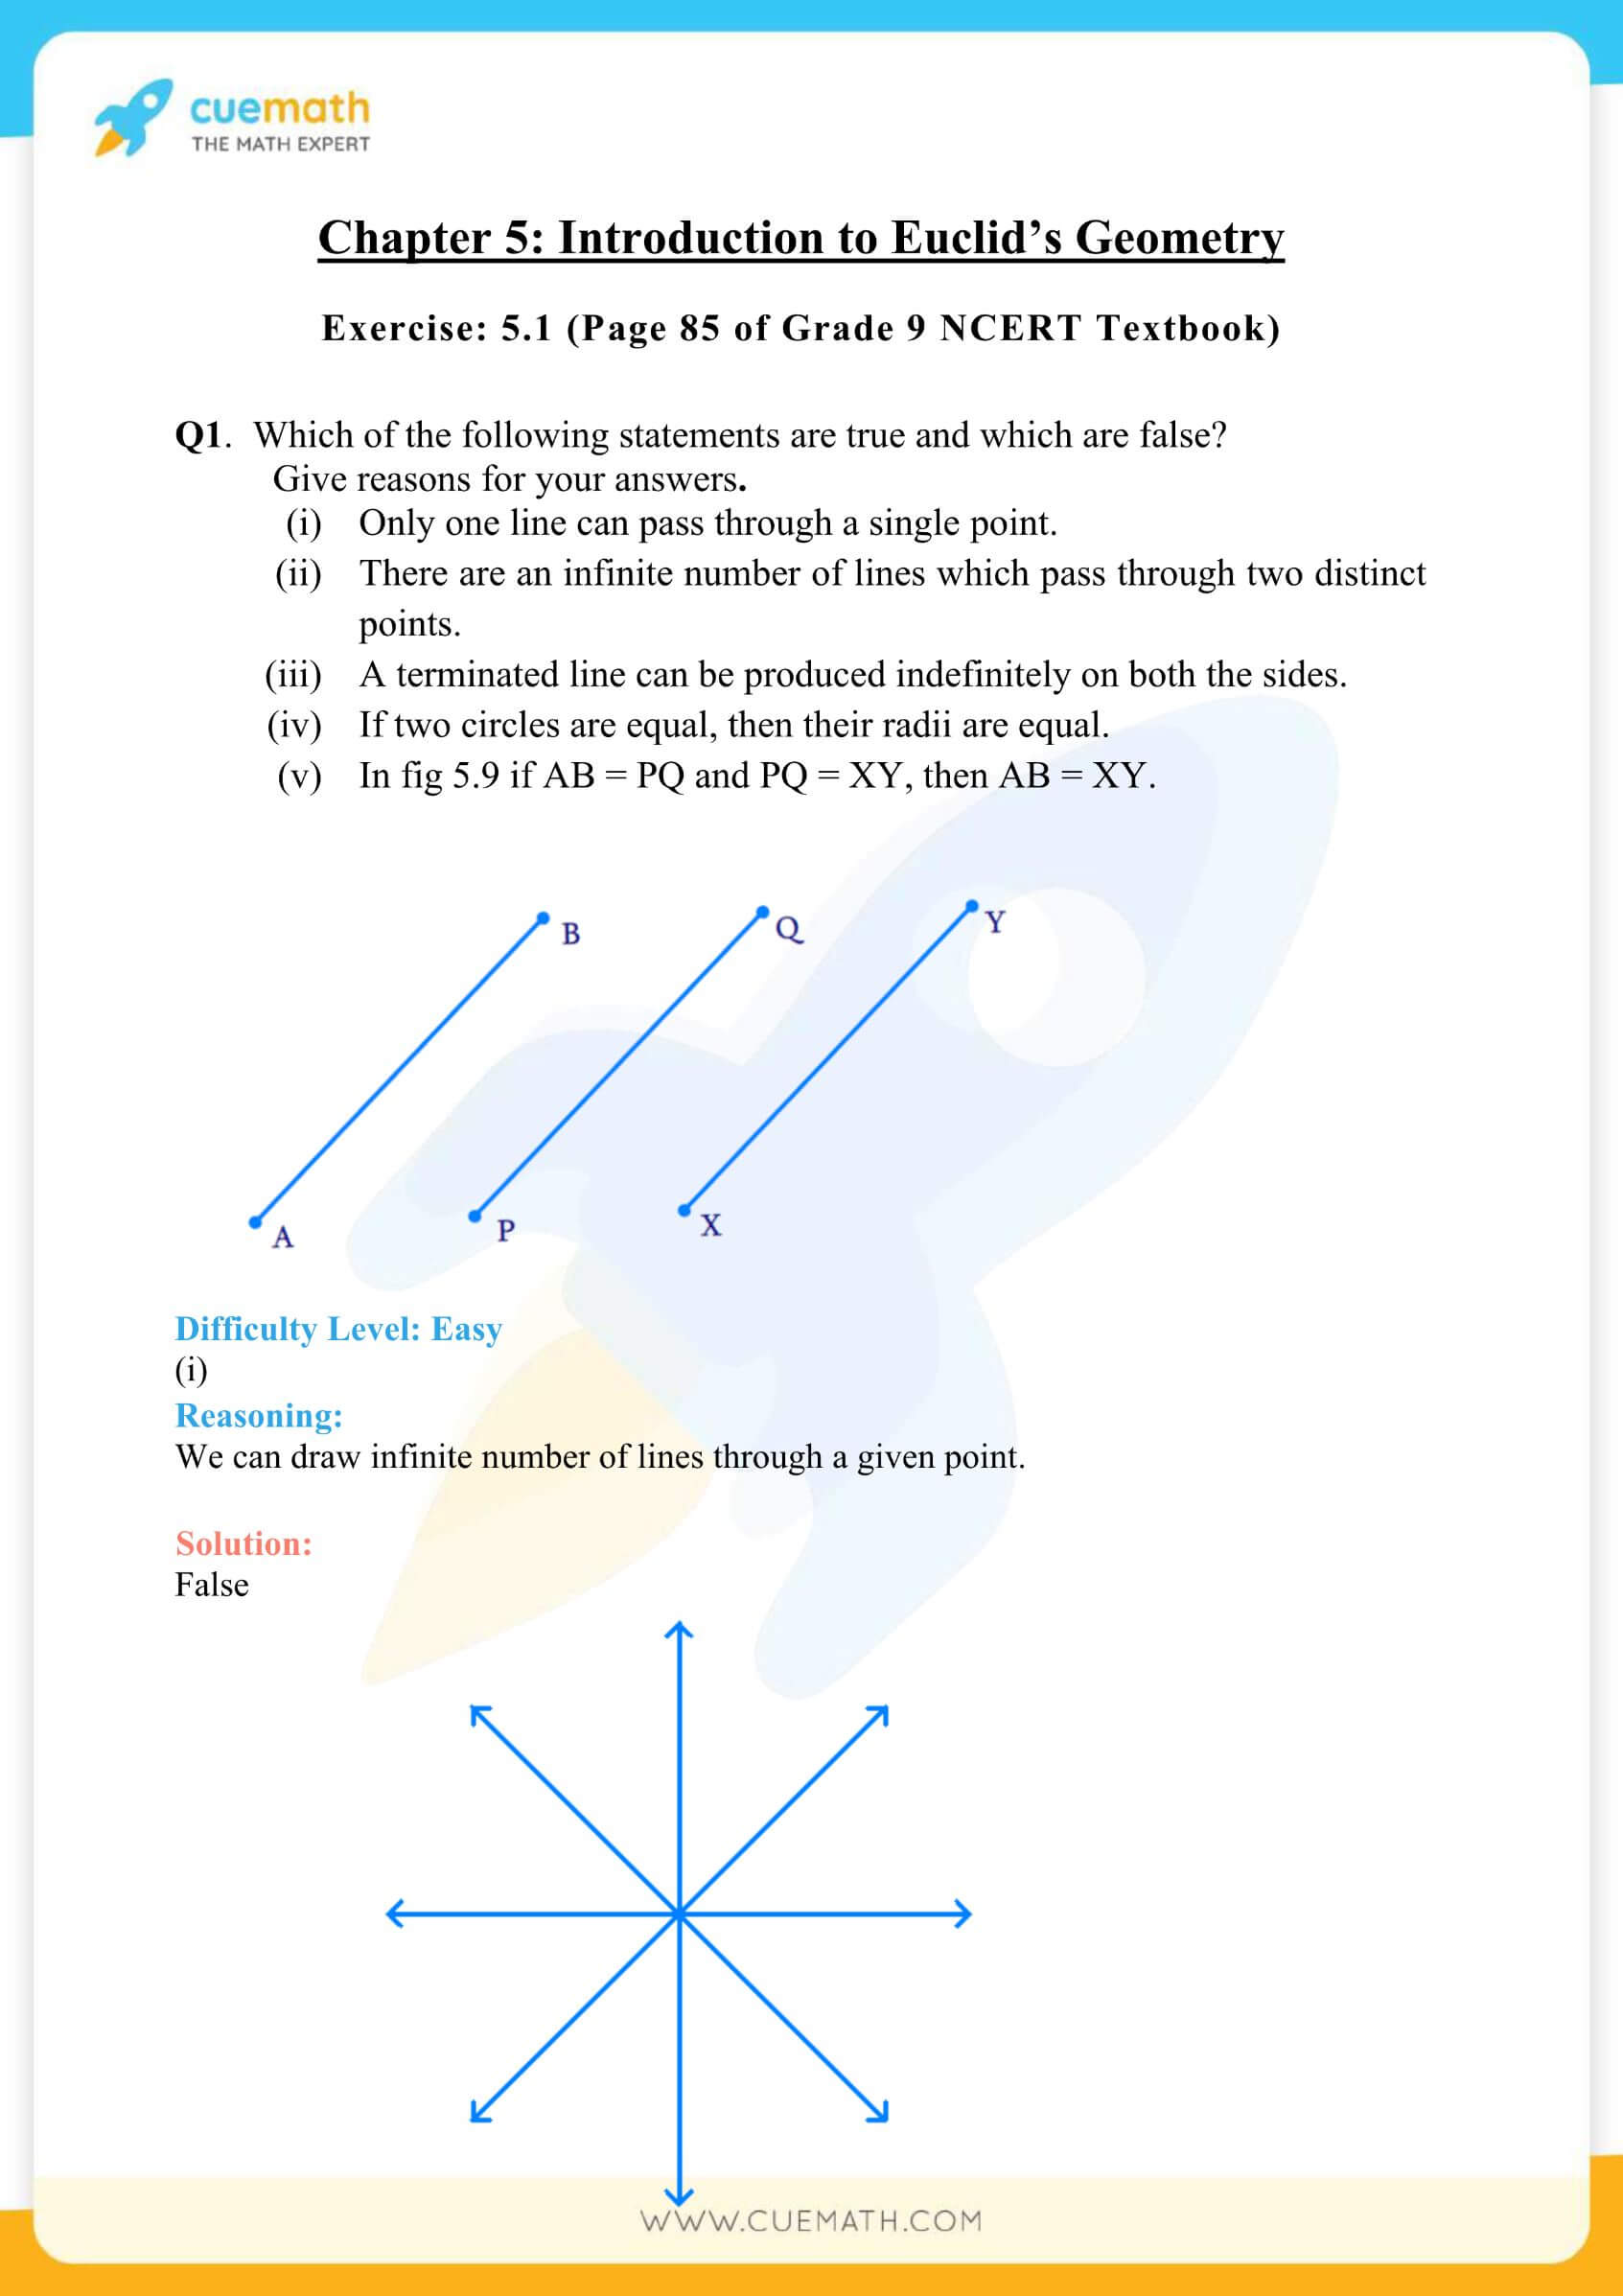 NCERT Solutions Class 9 Math Chapter 5 Exercise 5.1 1